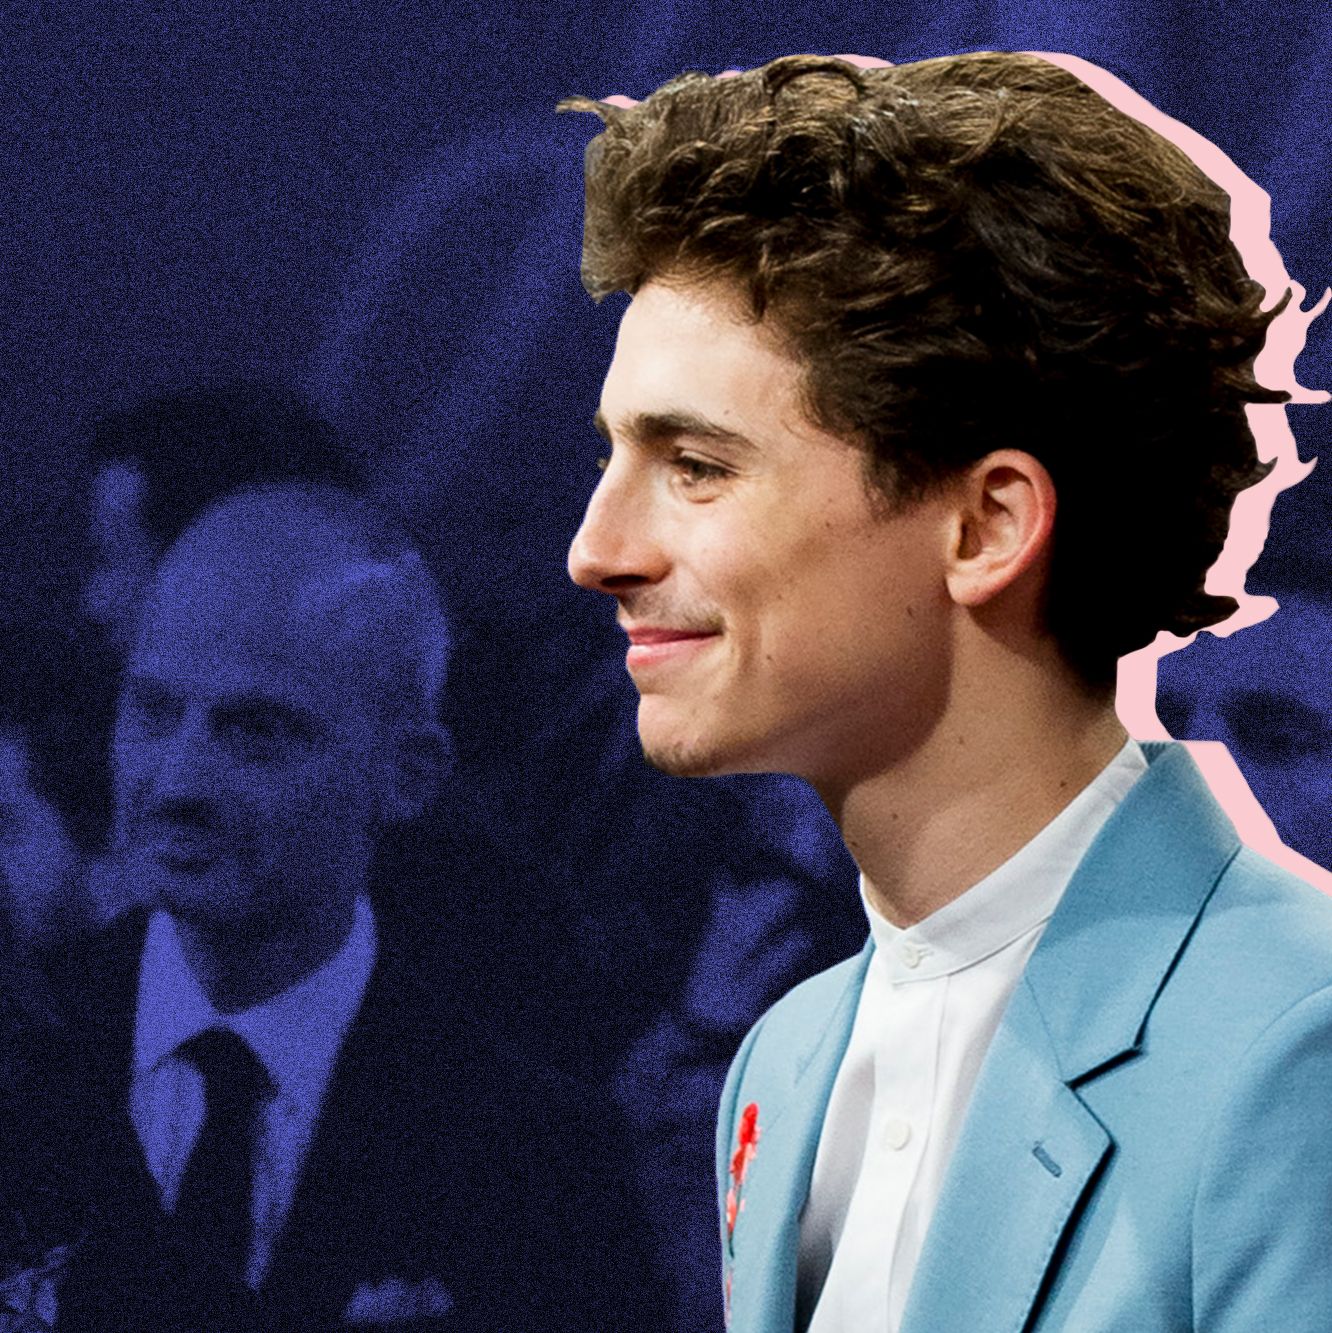 It Was All About What Timmy Chalamet Didn't Wear (A Shirt!) on the